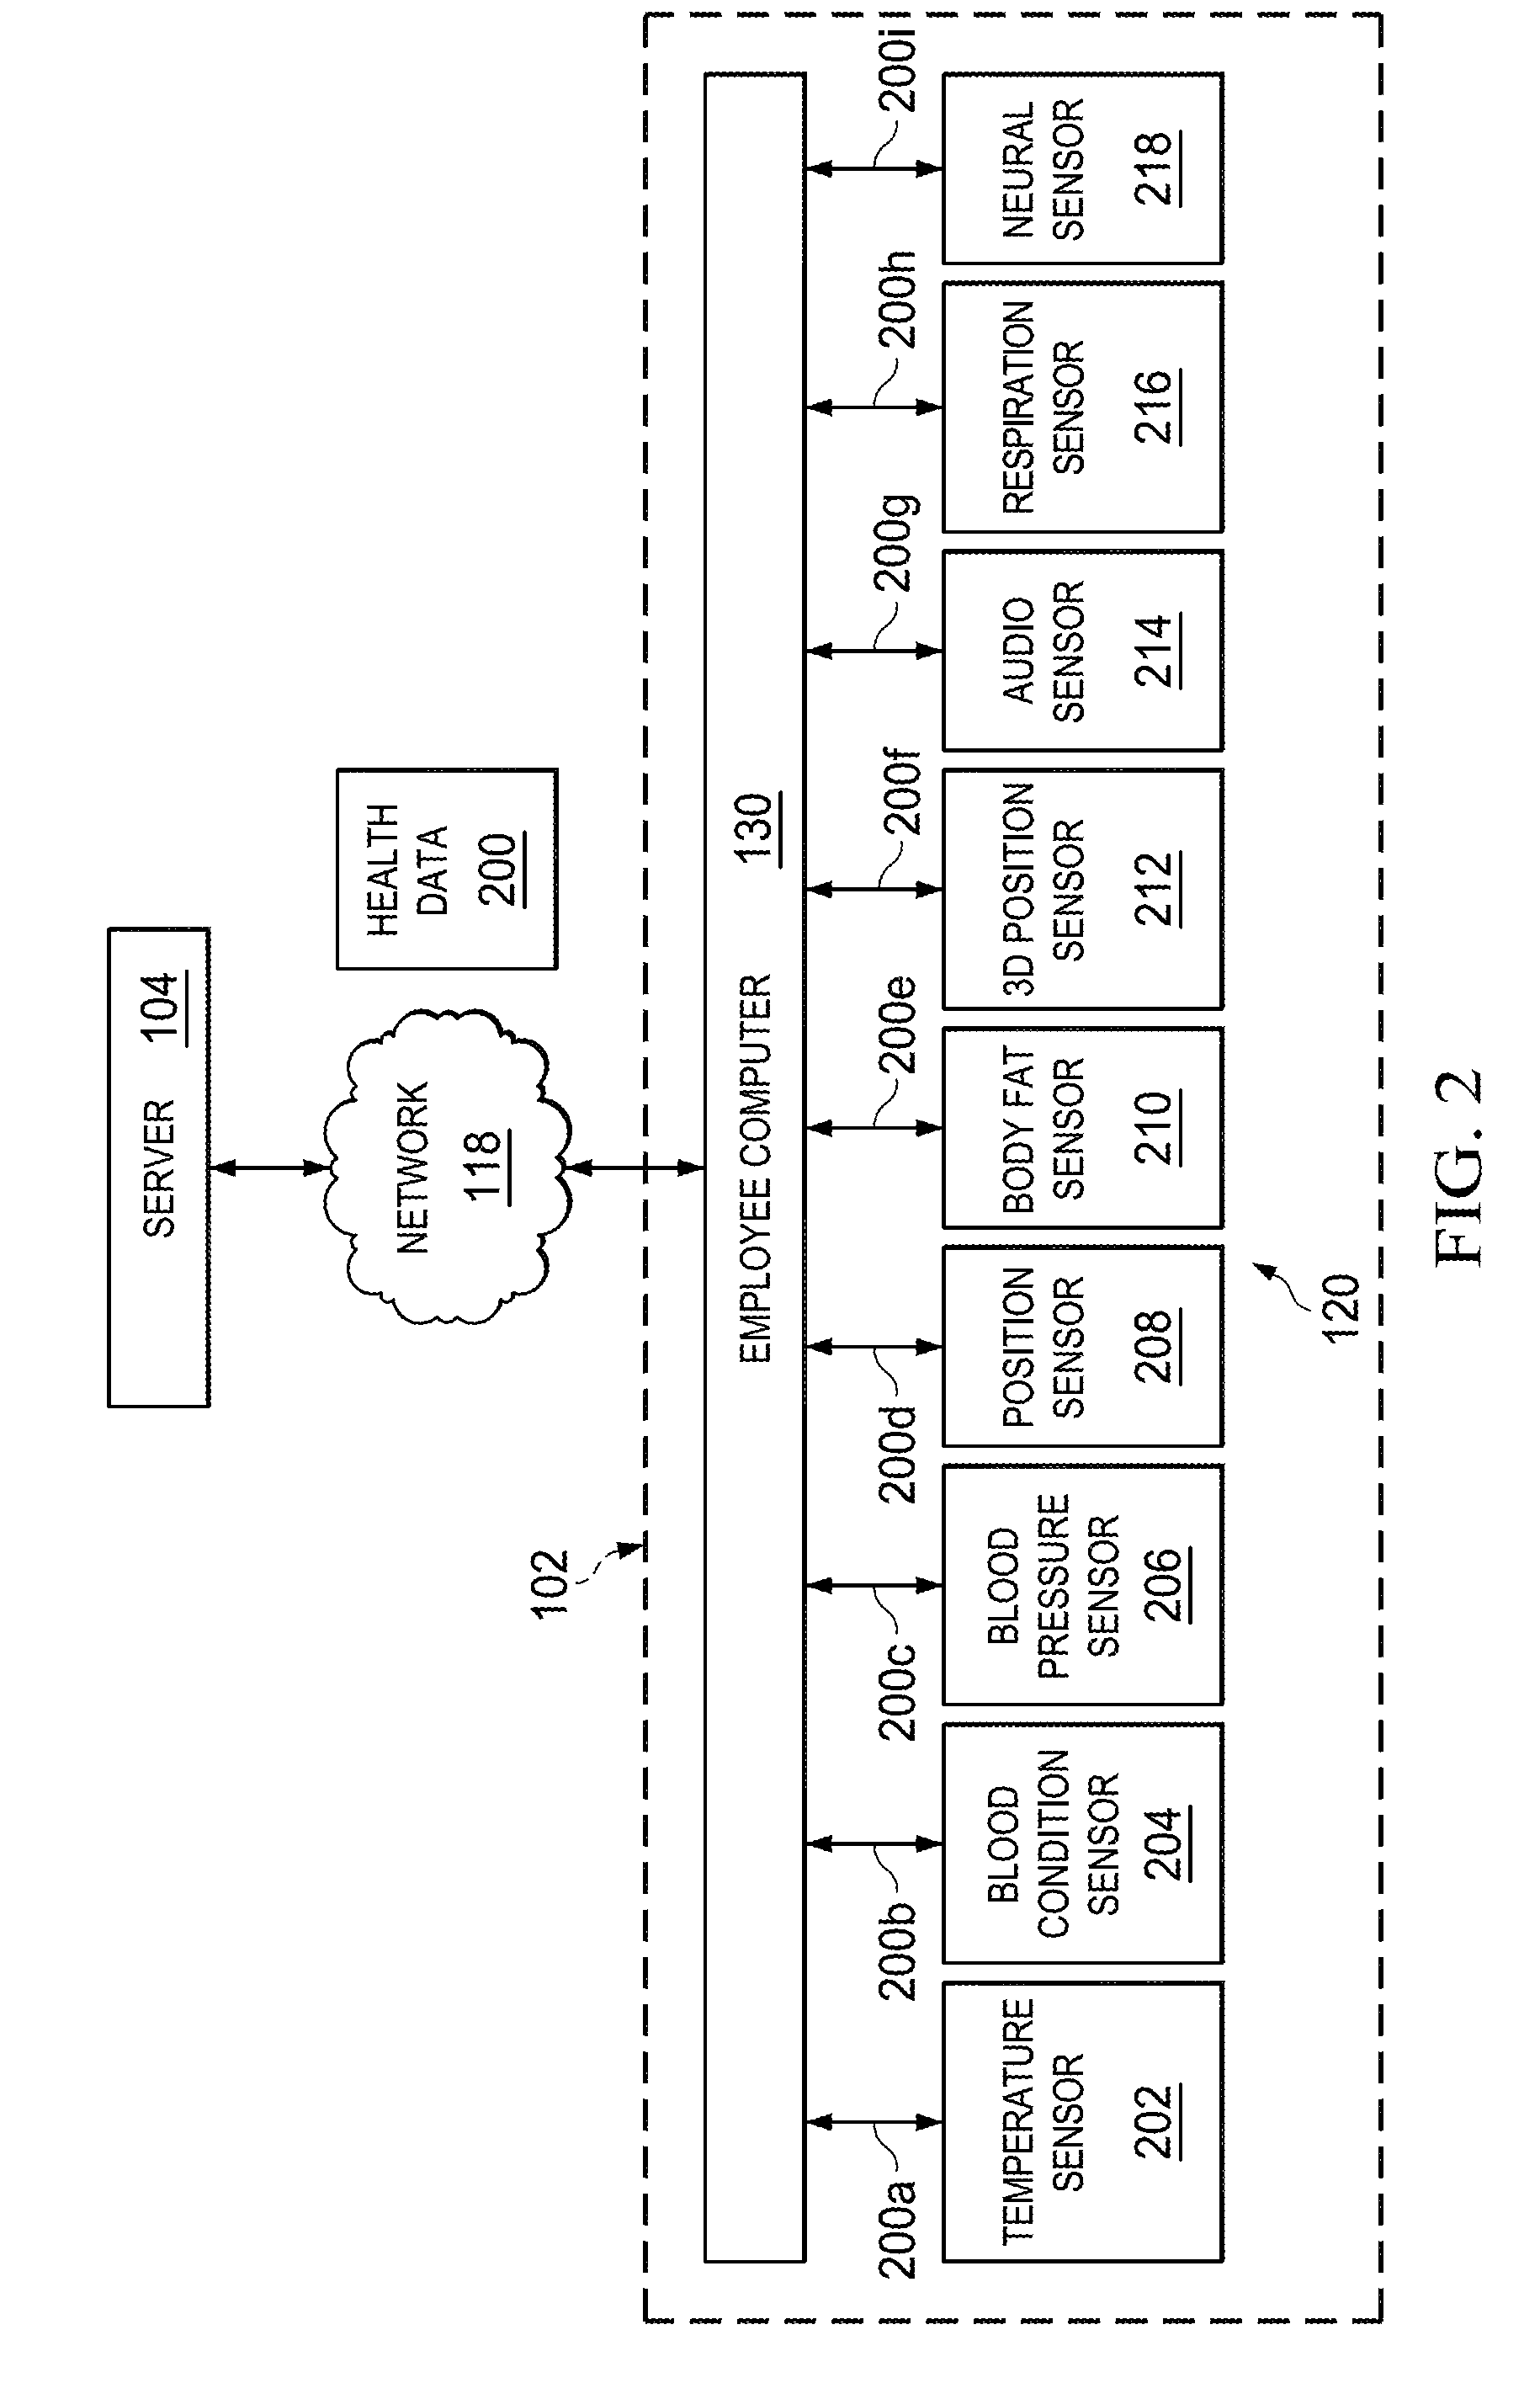 Chair pad system and associated, computer medium and computer-implemented methods for monitoring and improving health and productivity of employees